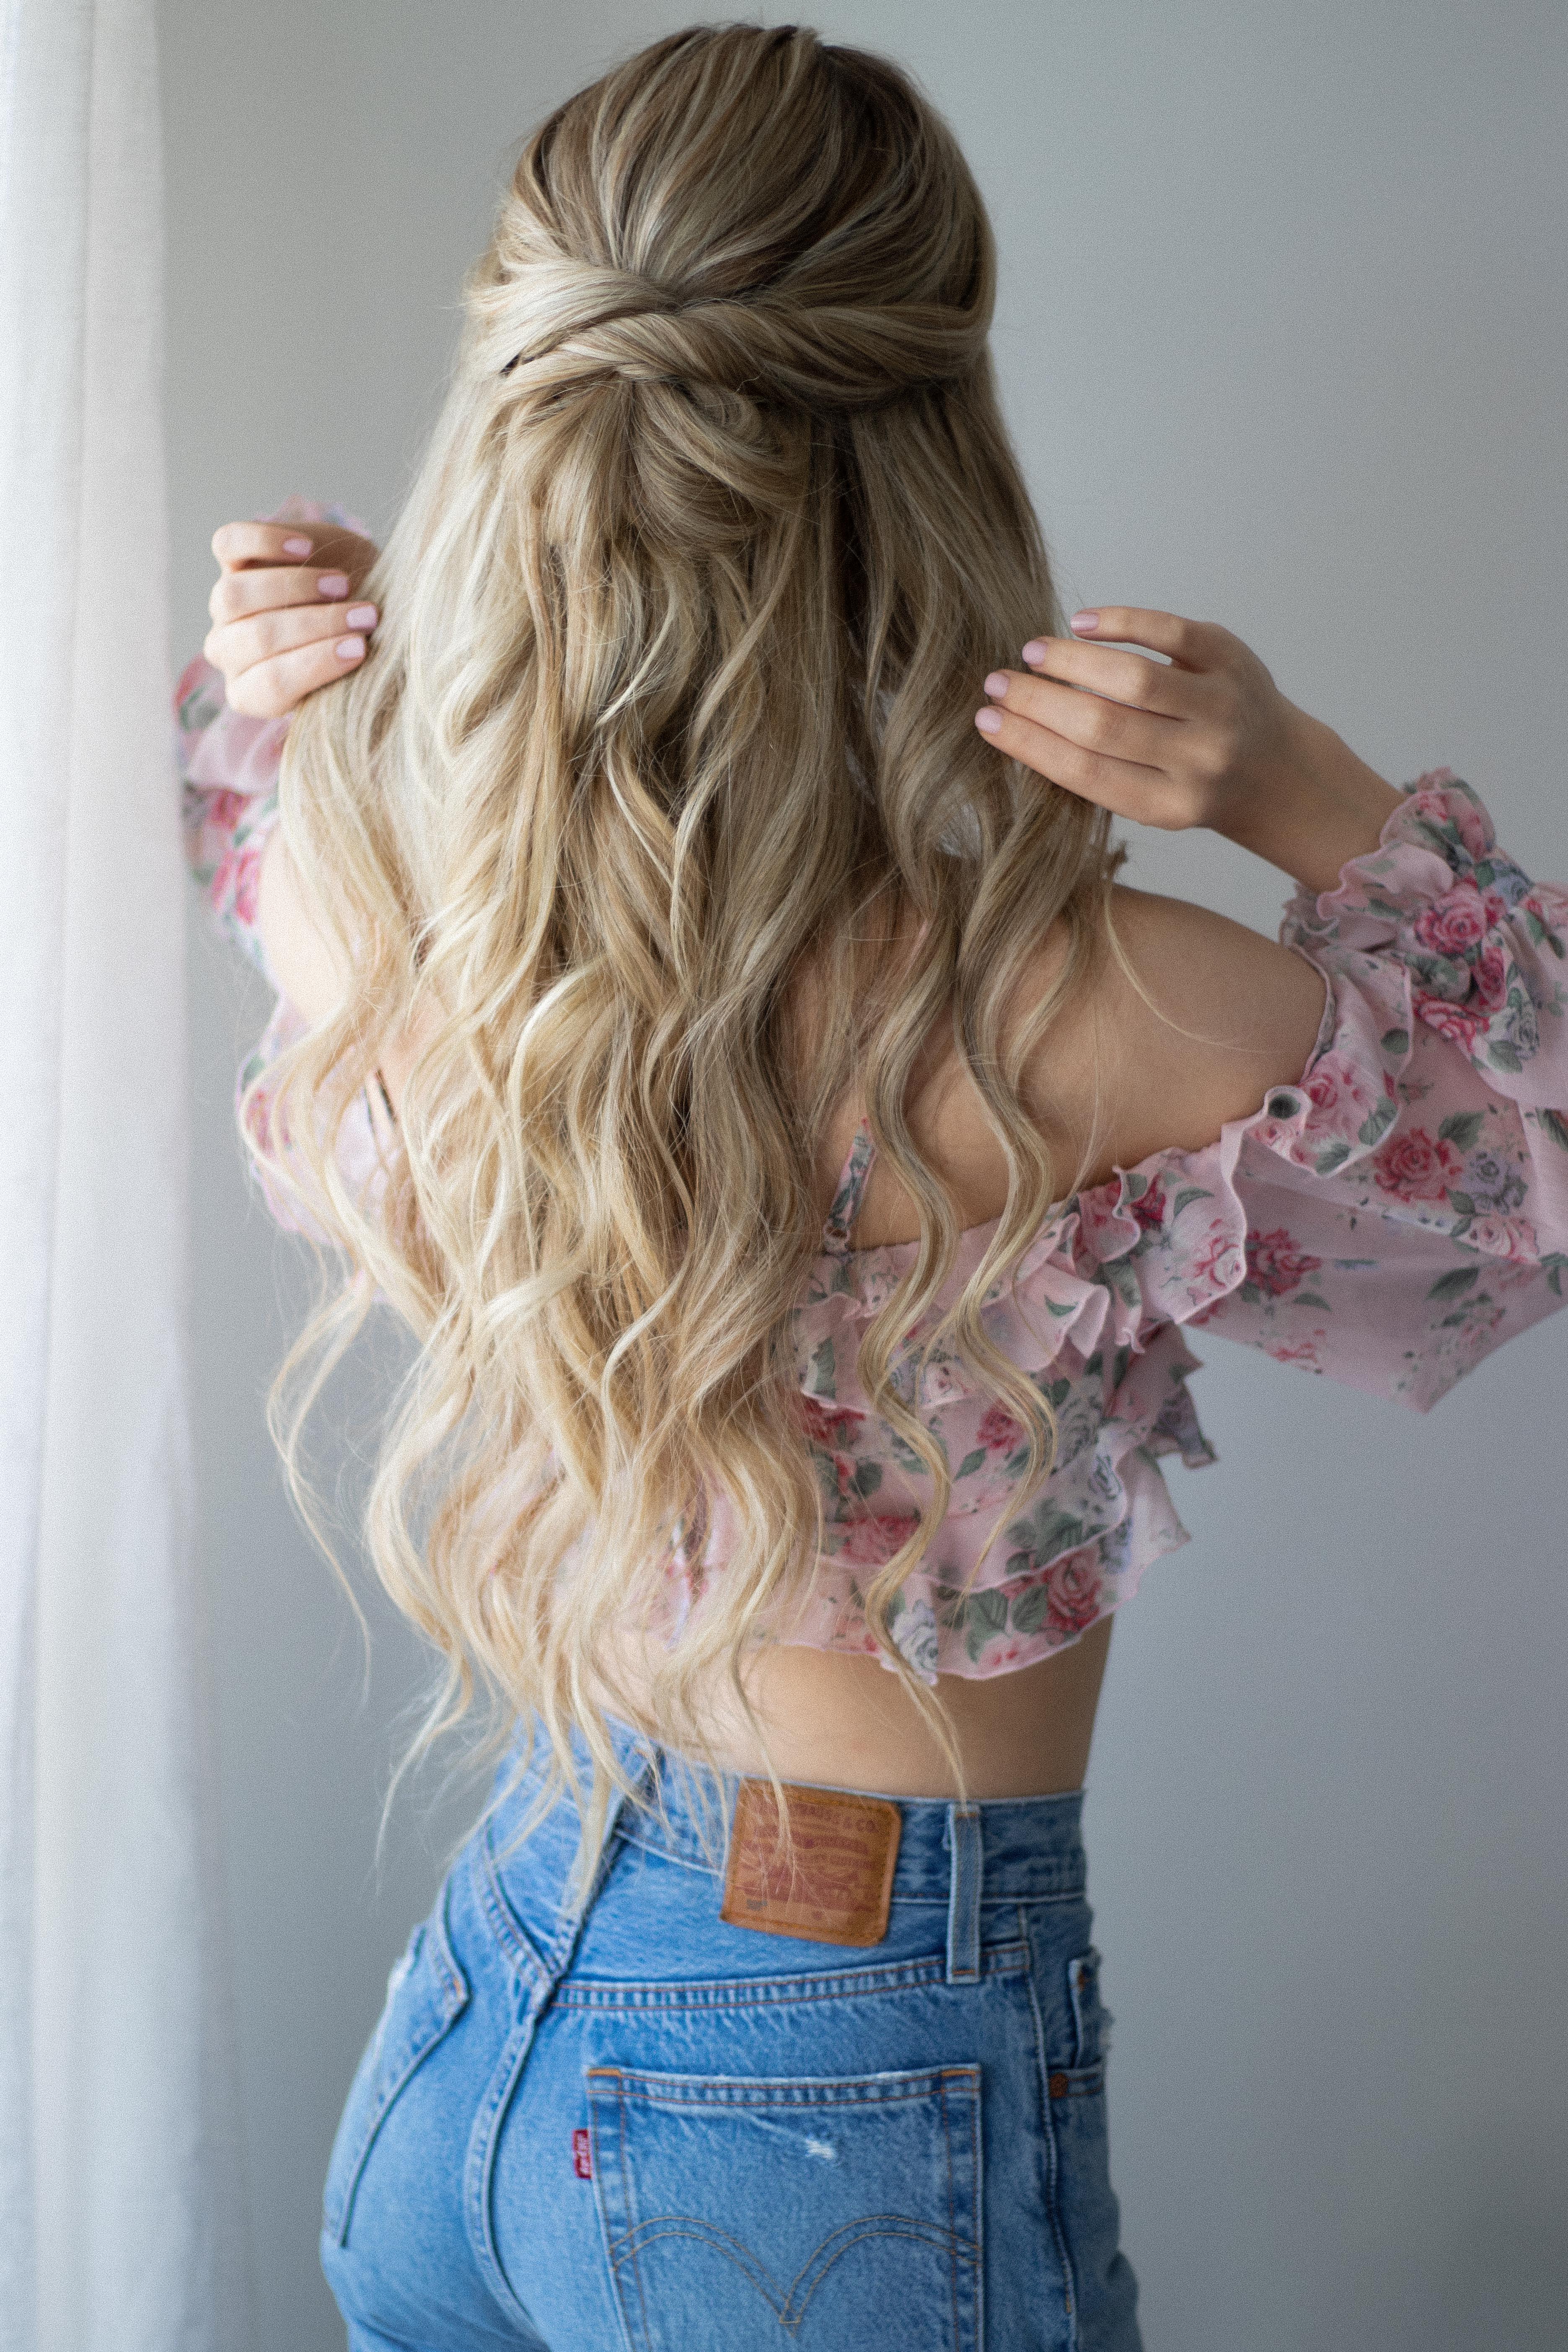 41 Cute Braided Hairstyles for Summer 2019 - StayGlam